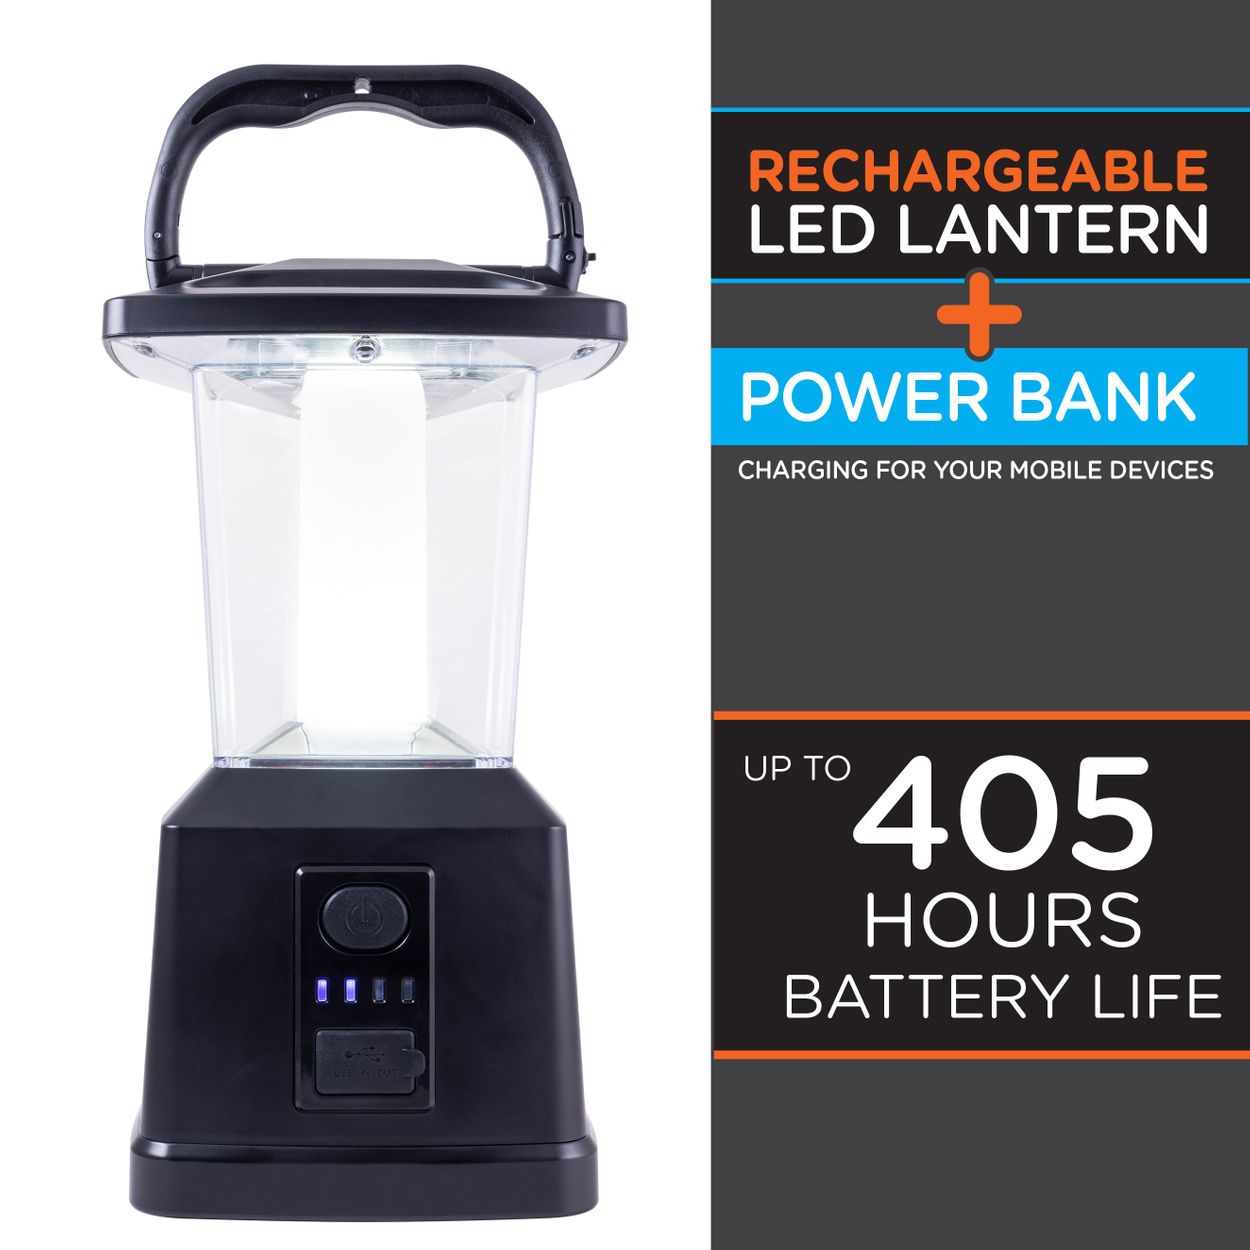 lantern with a graphic showing lumens and battery life